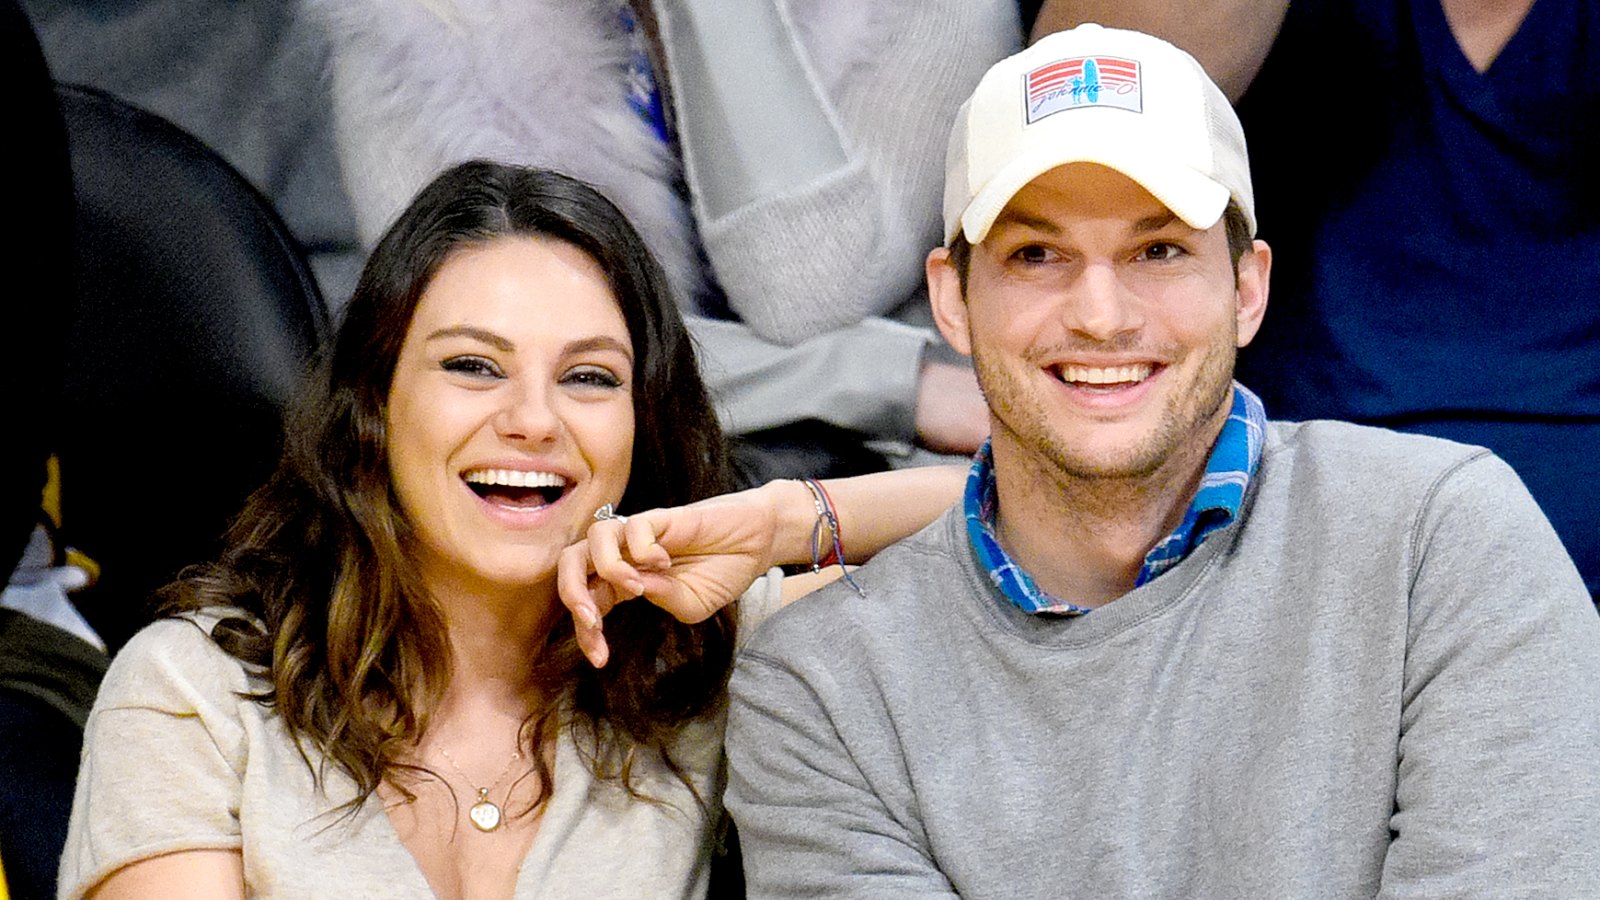 Mila Kunis and Ashton Kutcher attend a basketball game between the Oklahoma City Thunder and the Los Angeles Lakers at Staples Center on December 19, 2014 in Los Angeles, California.